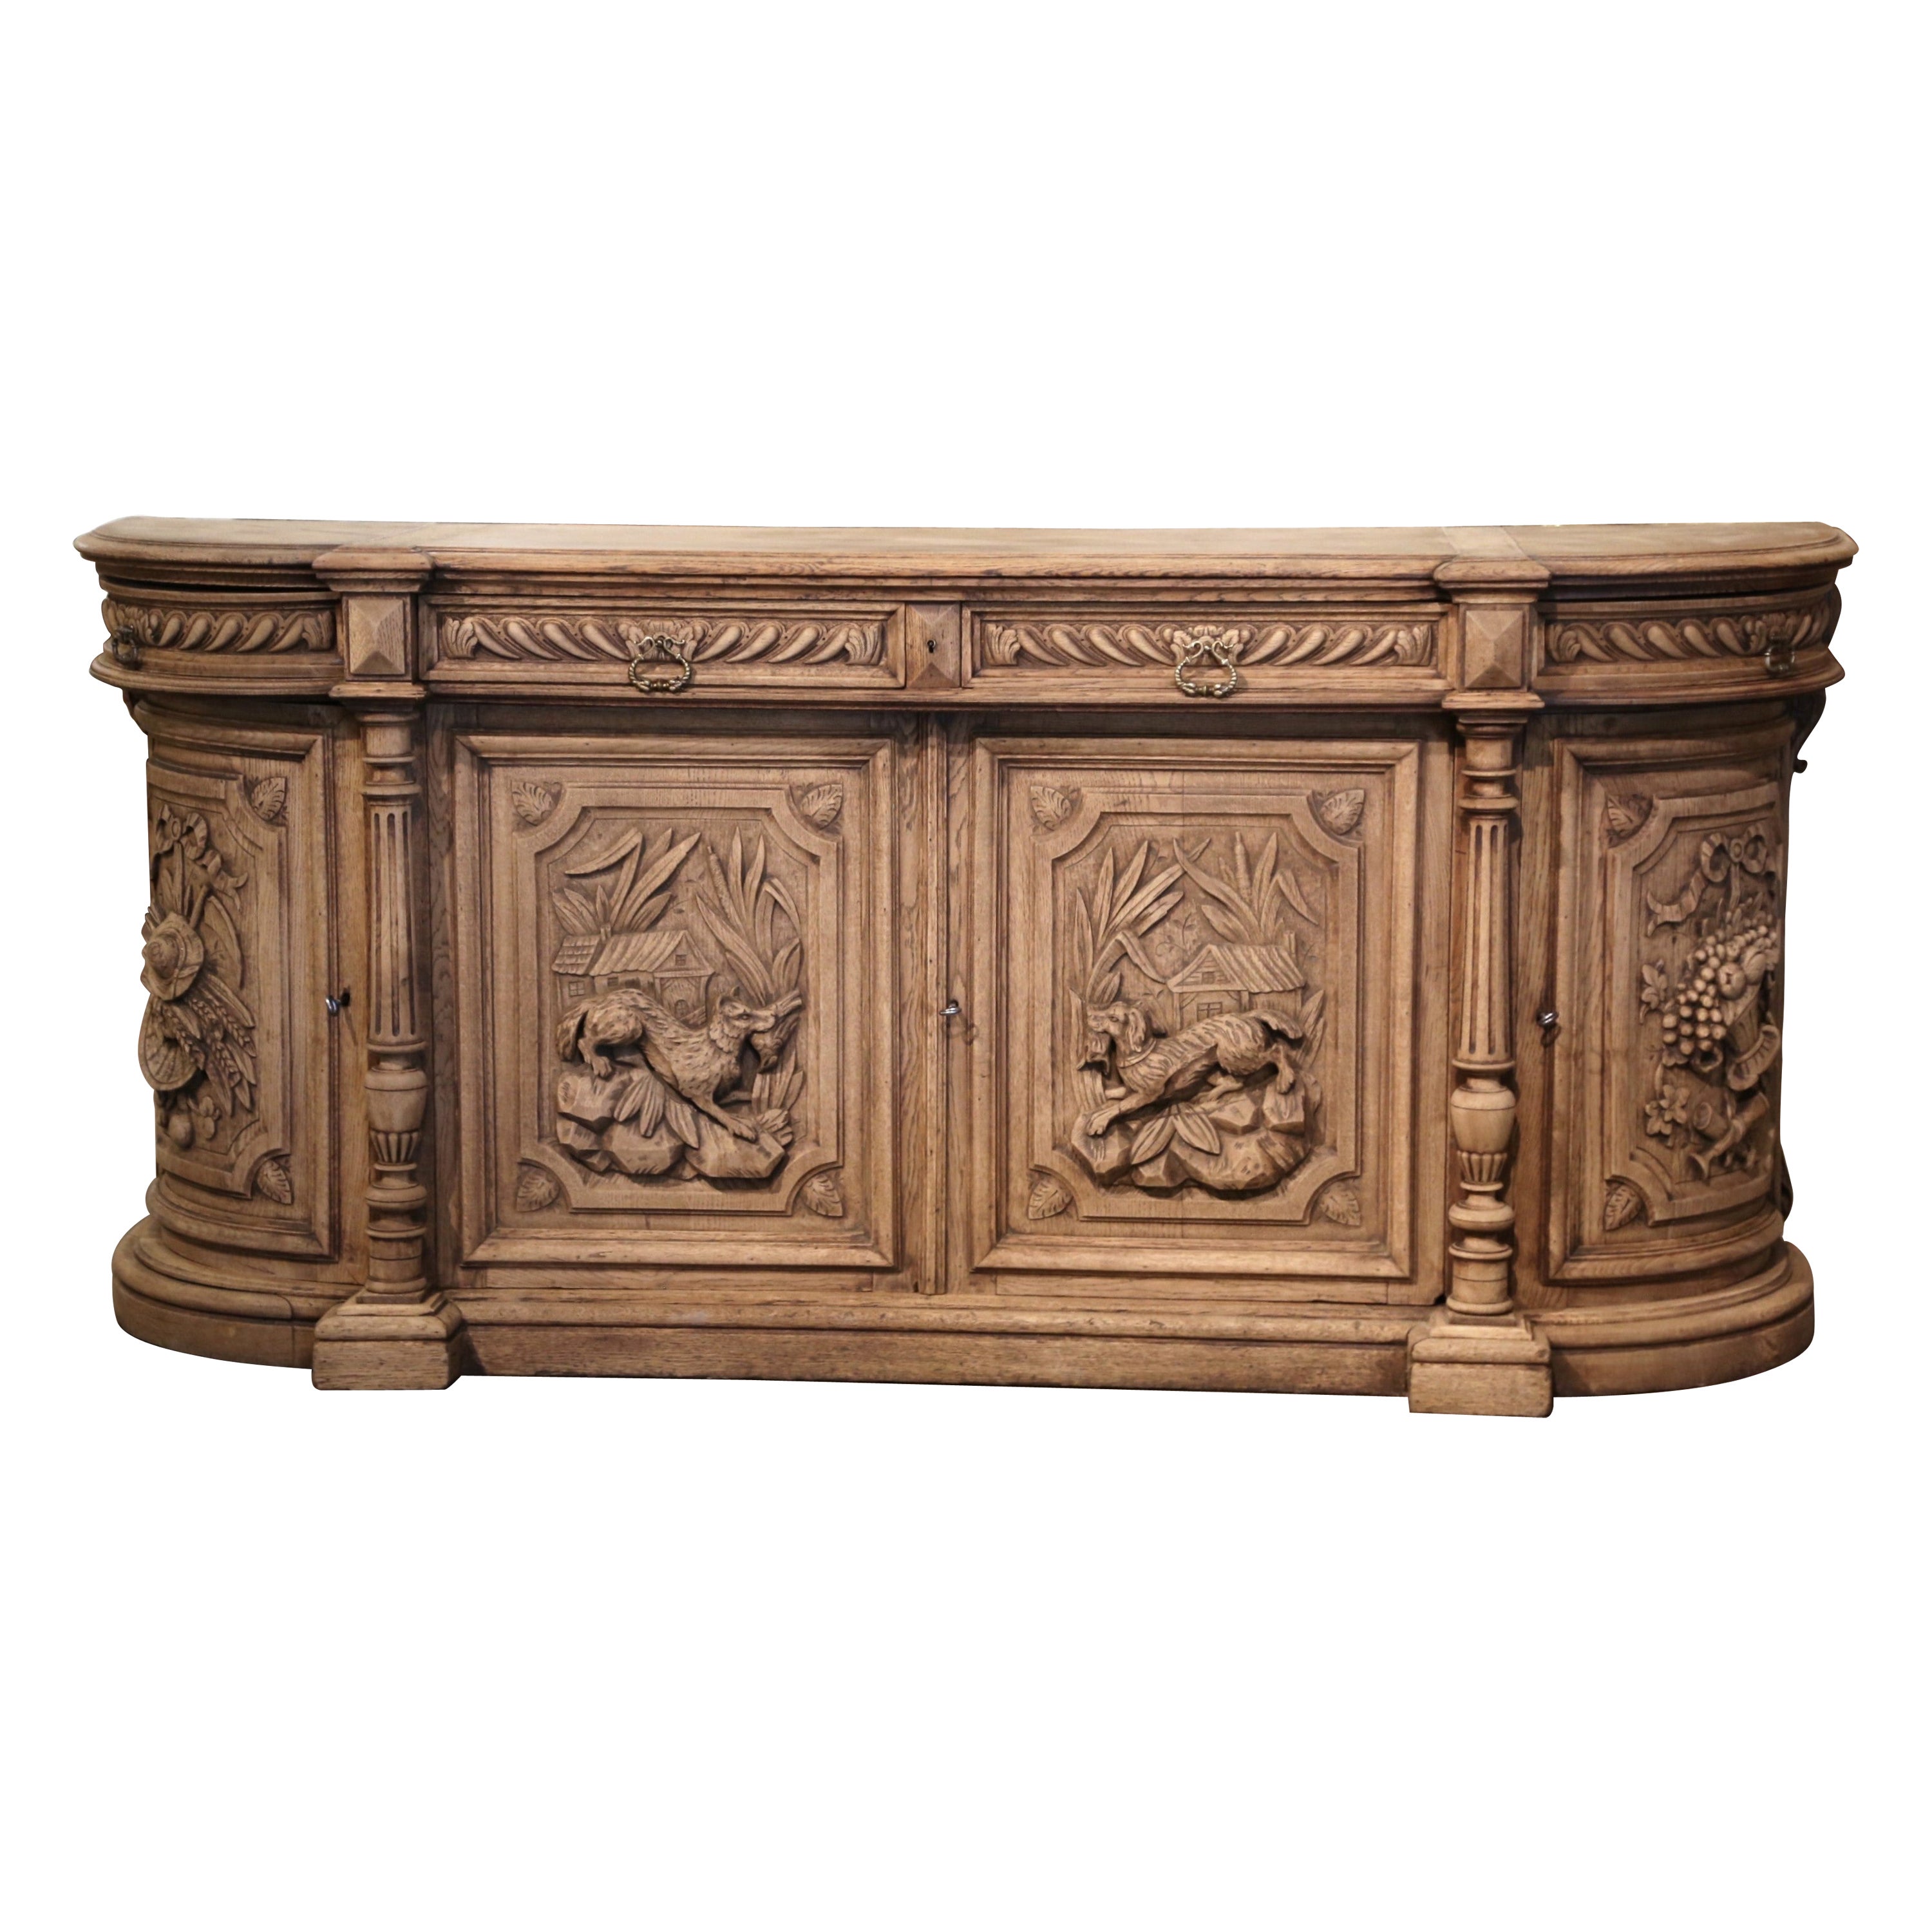 19th Century French Black Forest Carved Bleached Oak Four-Door Buffet Enfilade